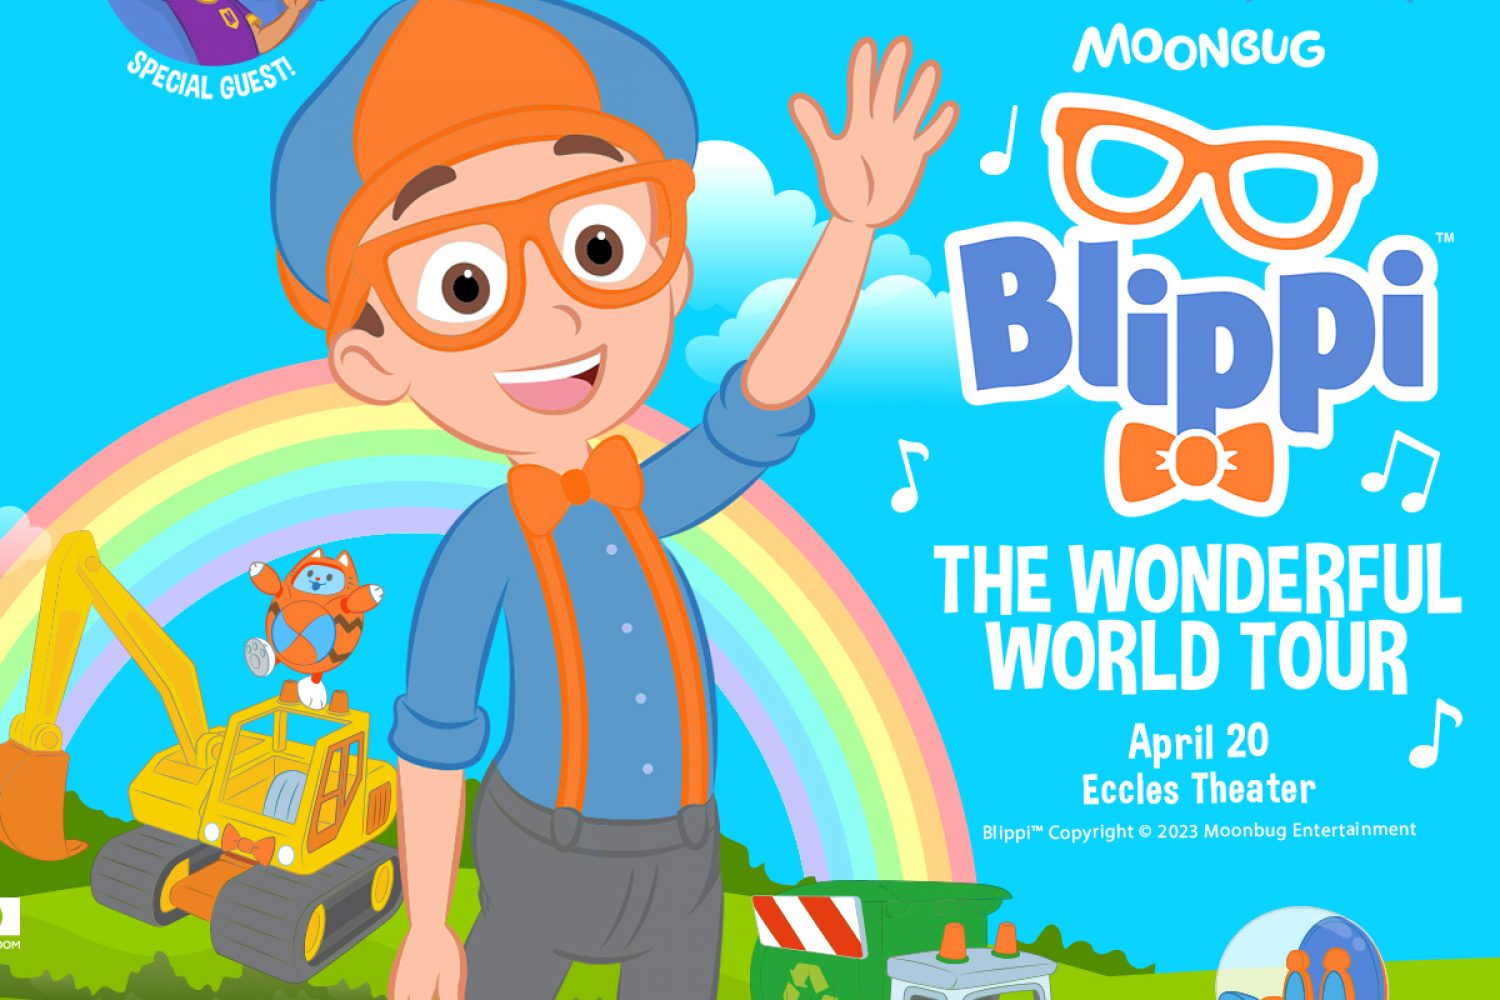 Donate to win Free Tickets to see Blippi on 4/20 The Wonderful World Tour